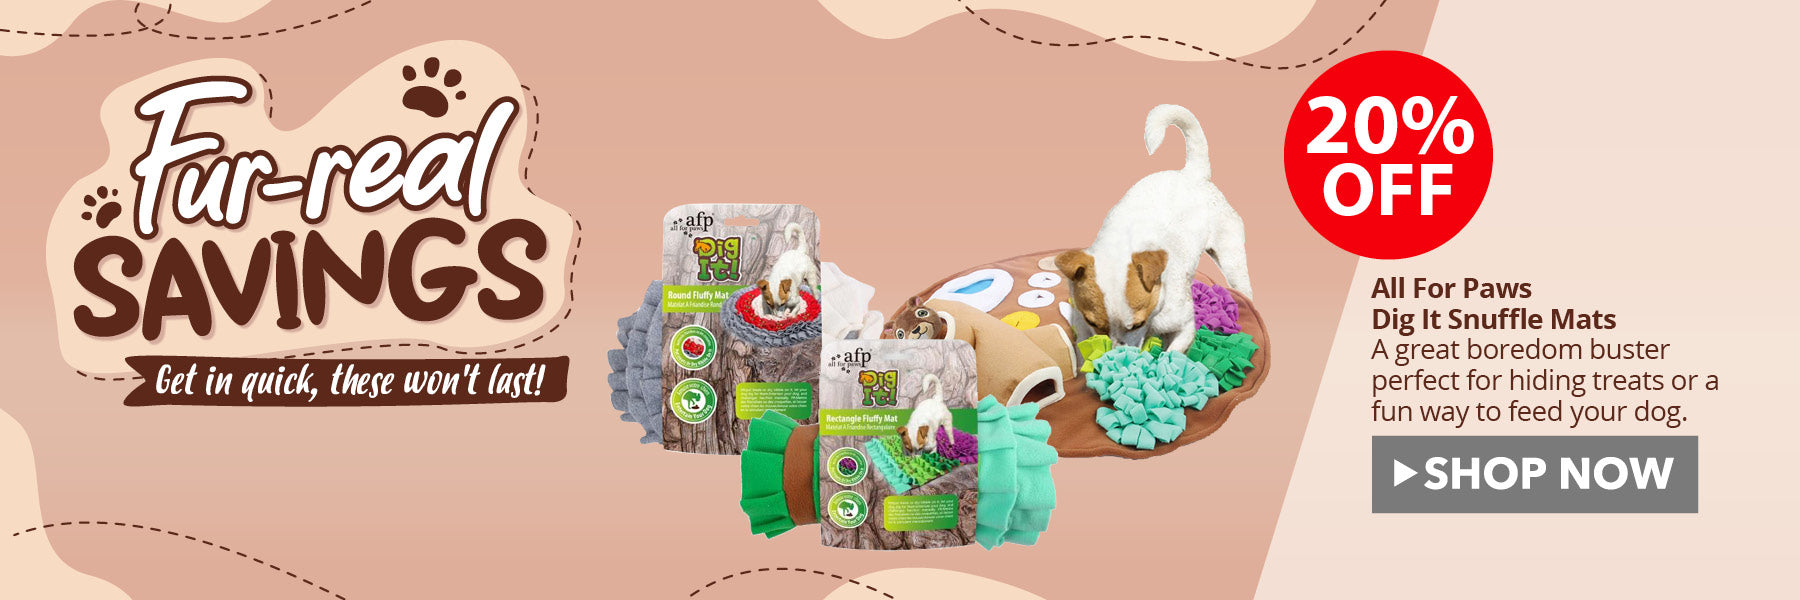 All For Paws Snuffle Mats ON SALE NOW